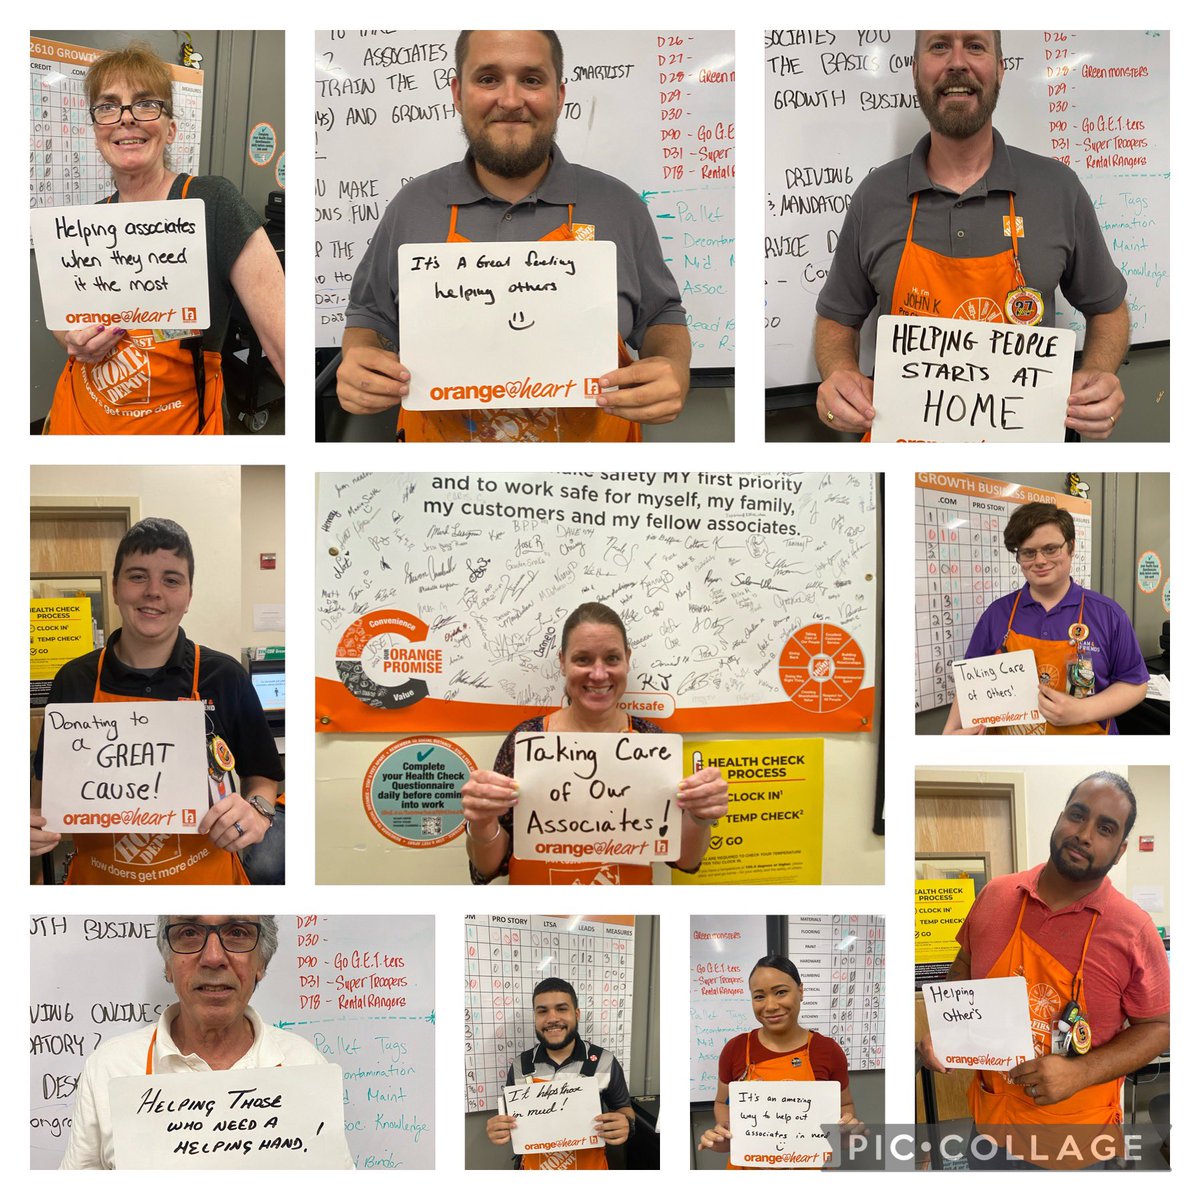 Leadership team at 2610 shouting out why they support the Homer fund!!! Thank you team #homerfund #OrangeAtHeart #chicopeeproud